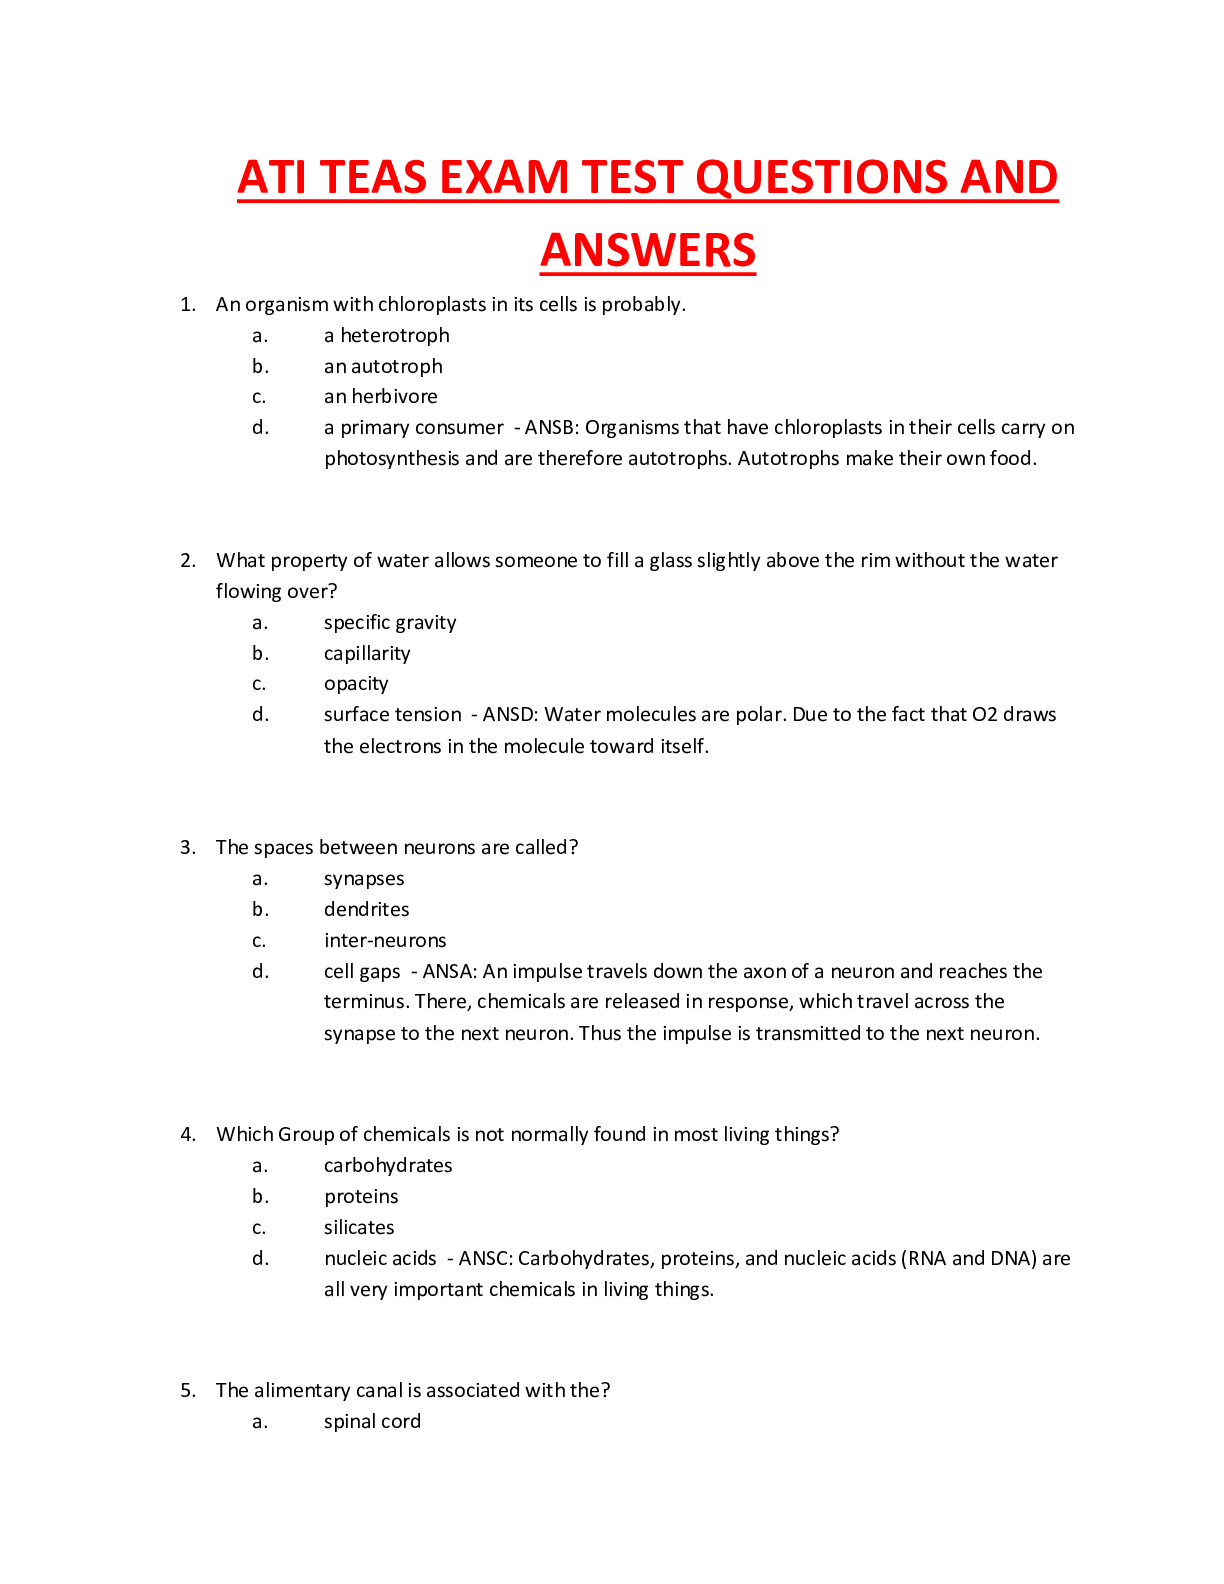 ATI TEAS EXAM TEST QUESTIONS AND ANSWERS - Browsegrades